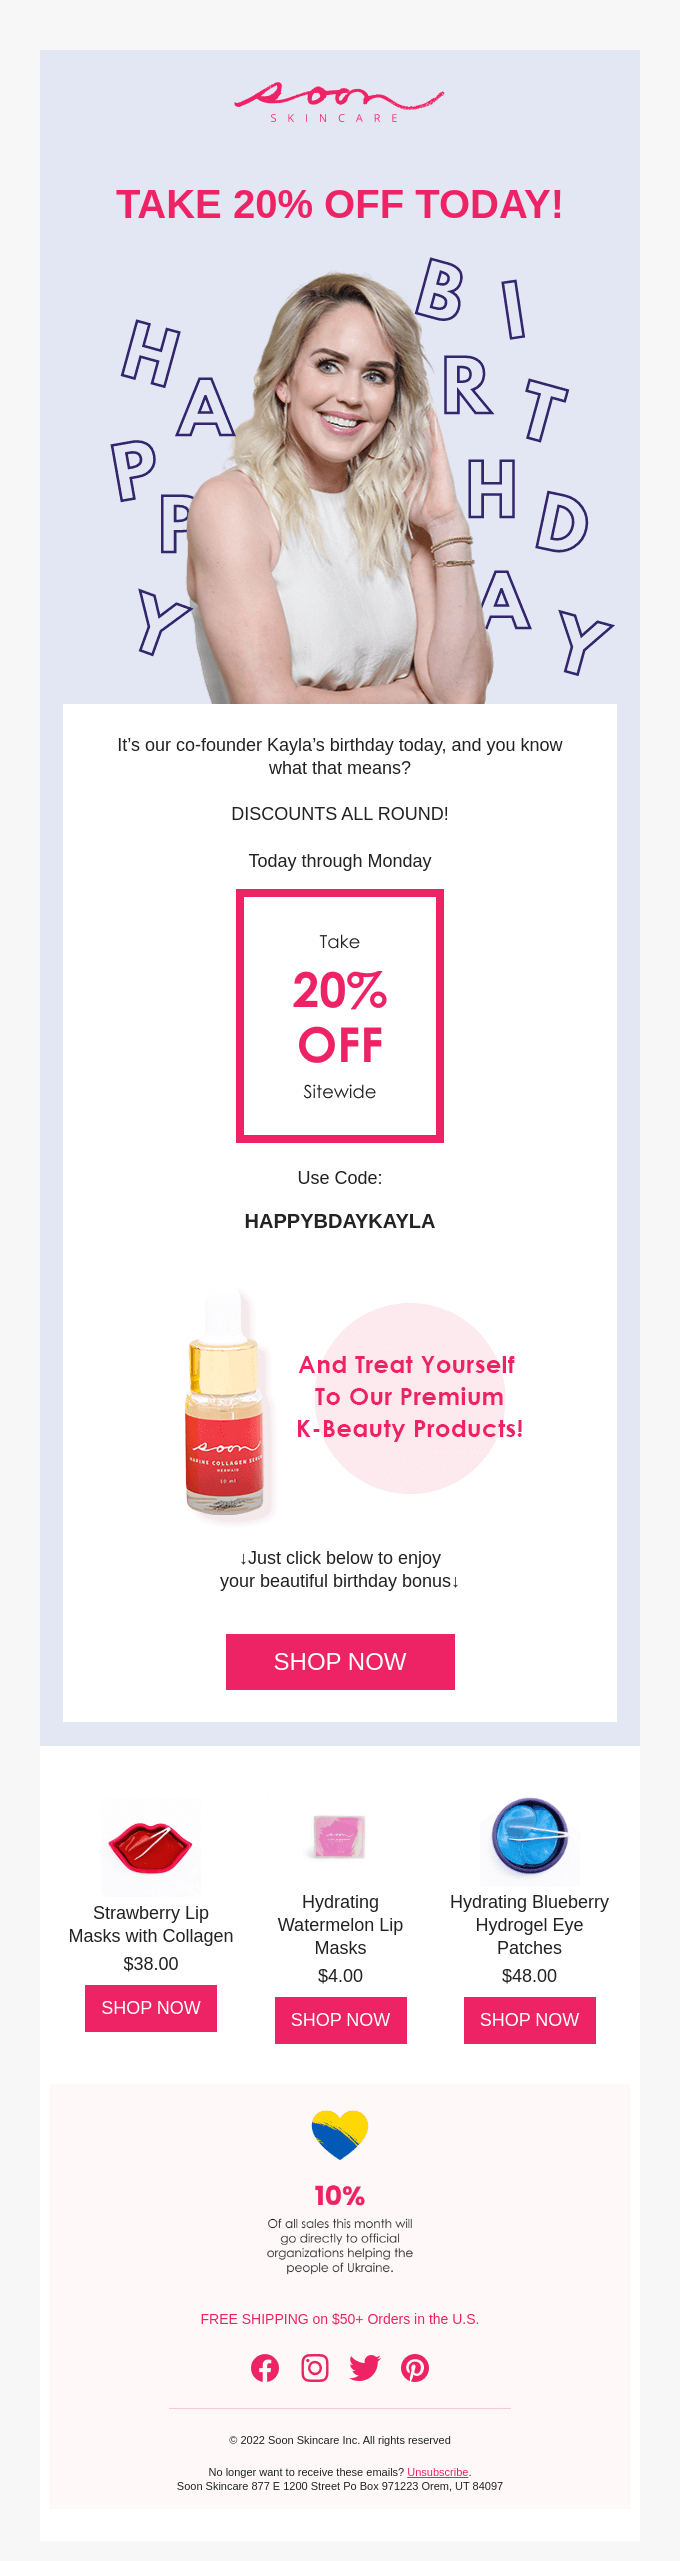 You get 20% OFF today! 🎉